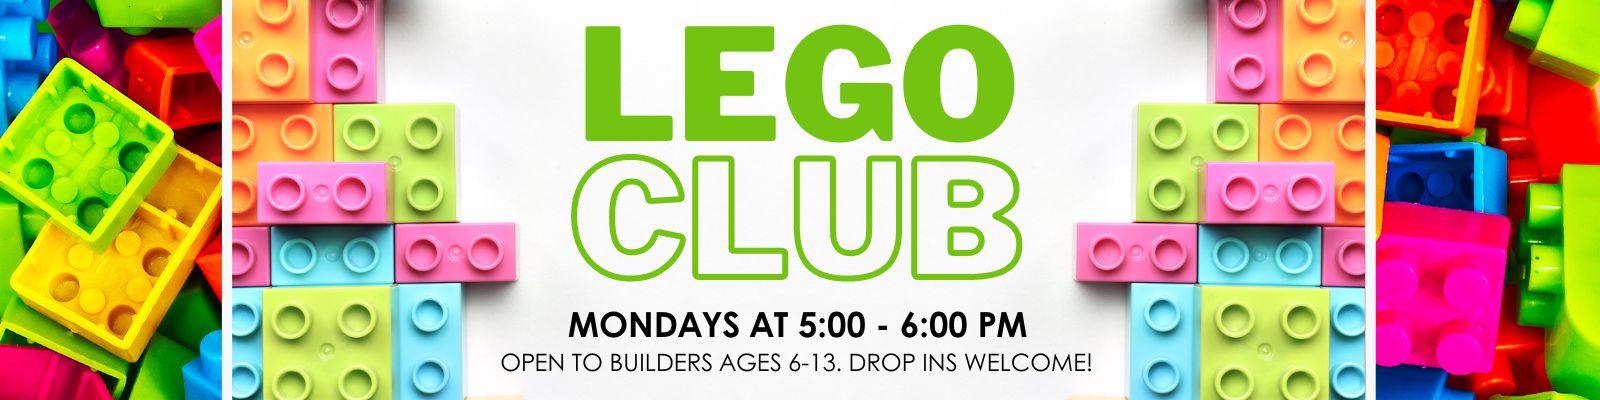 Lego Club feature graphic